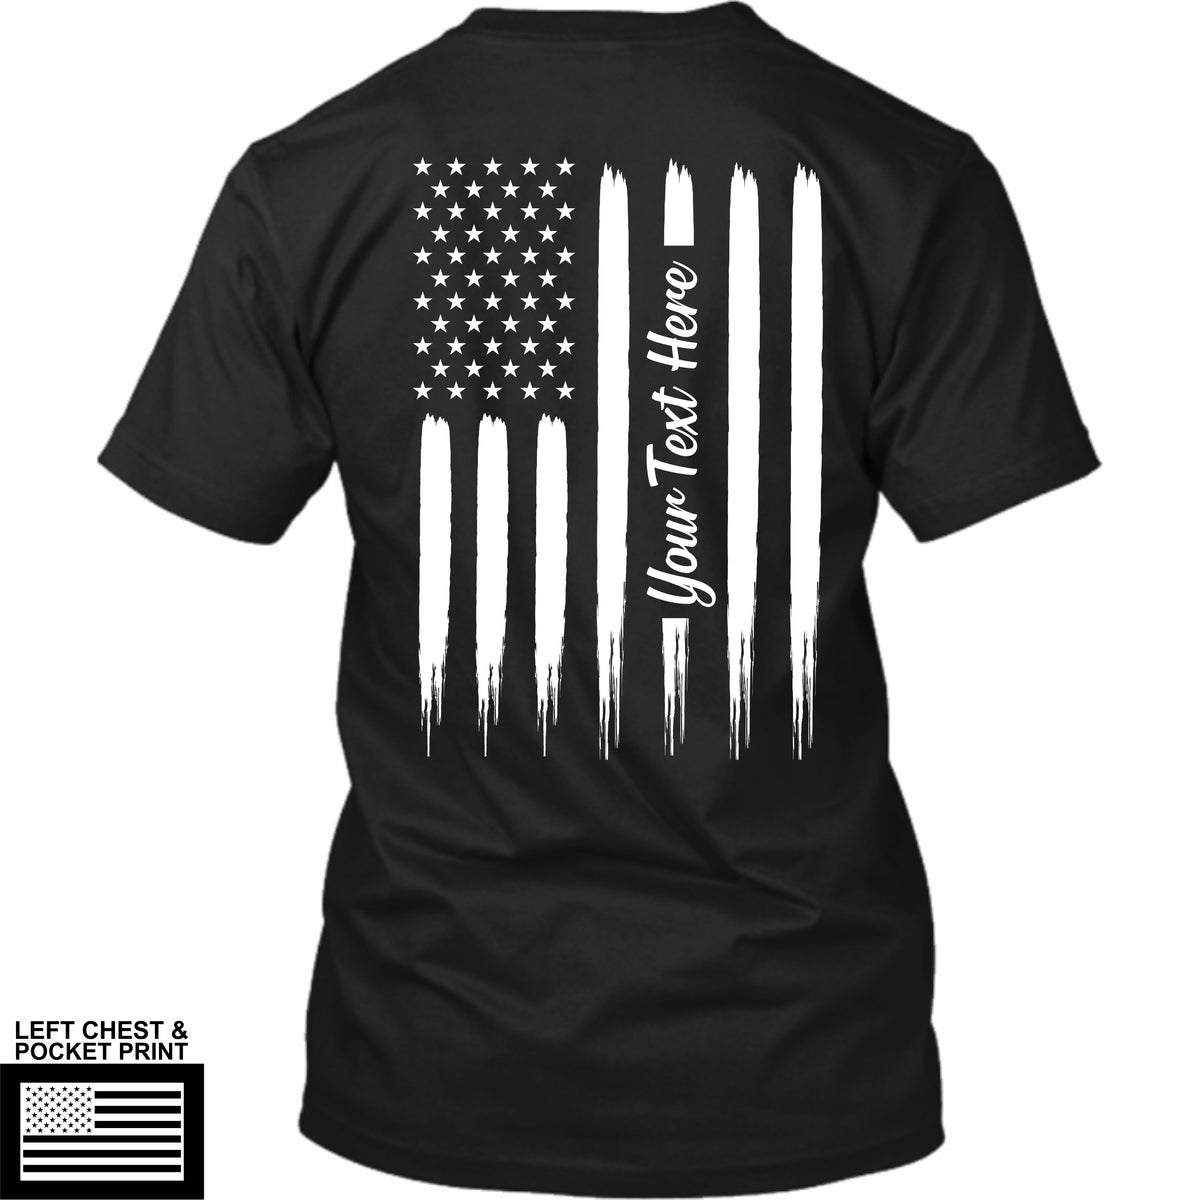 Tattered American Flag - Your Text Here